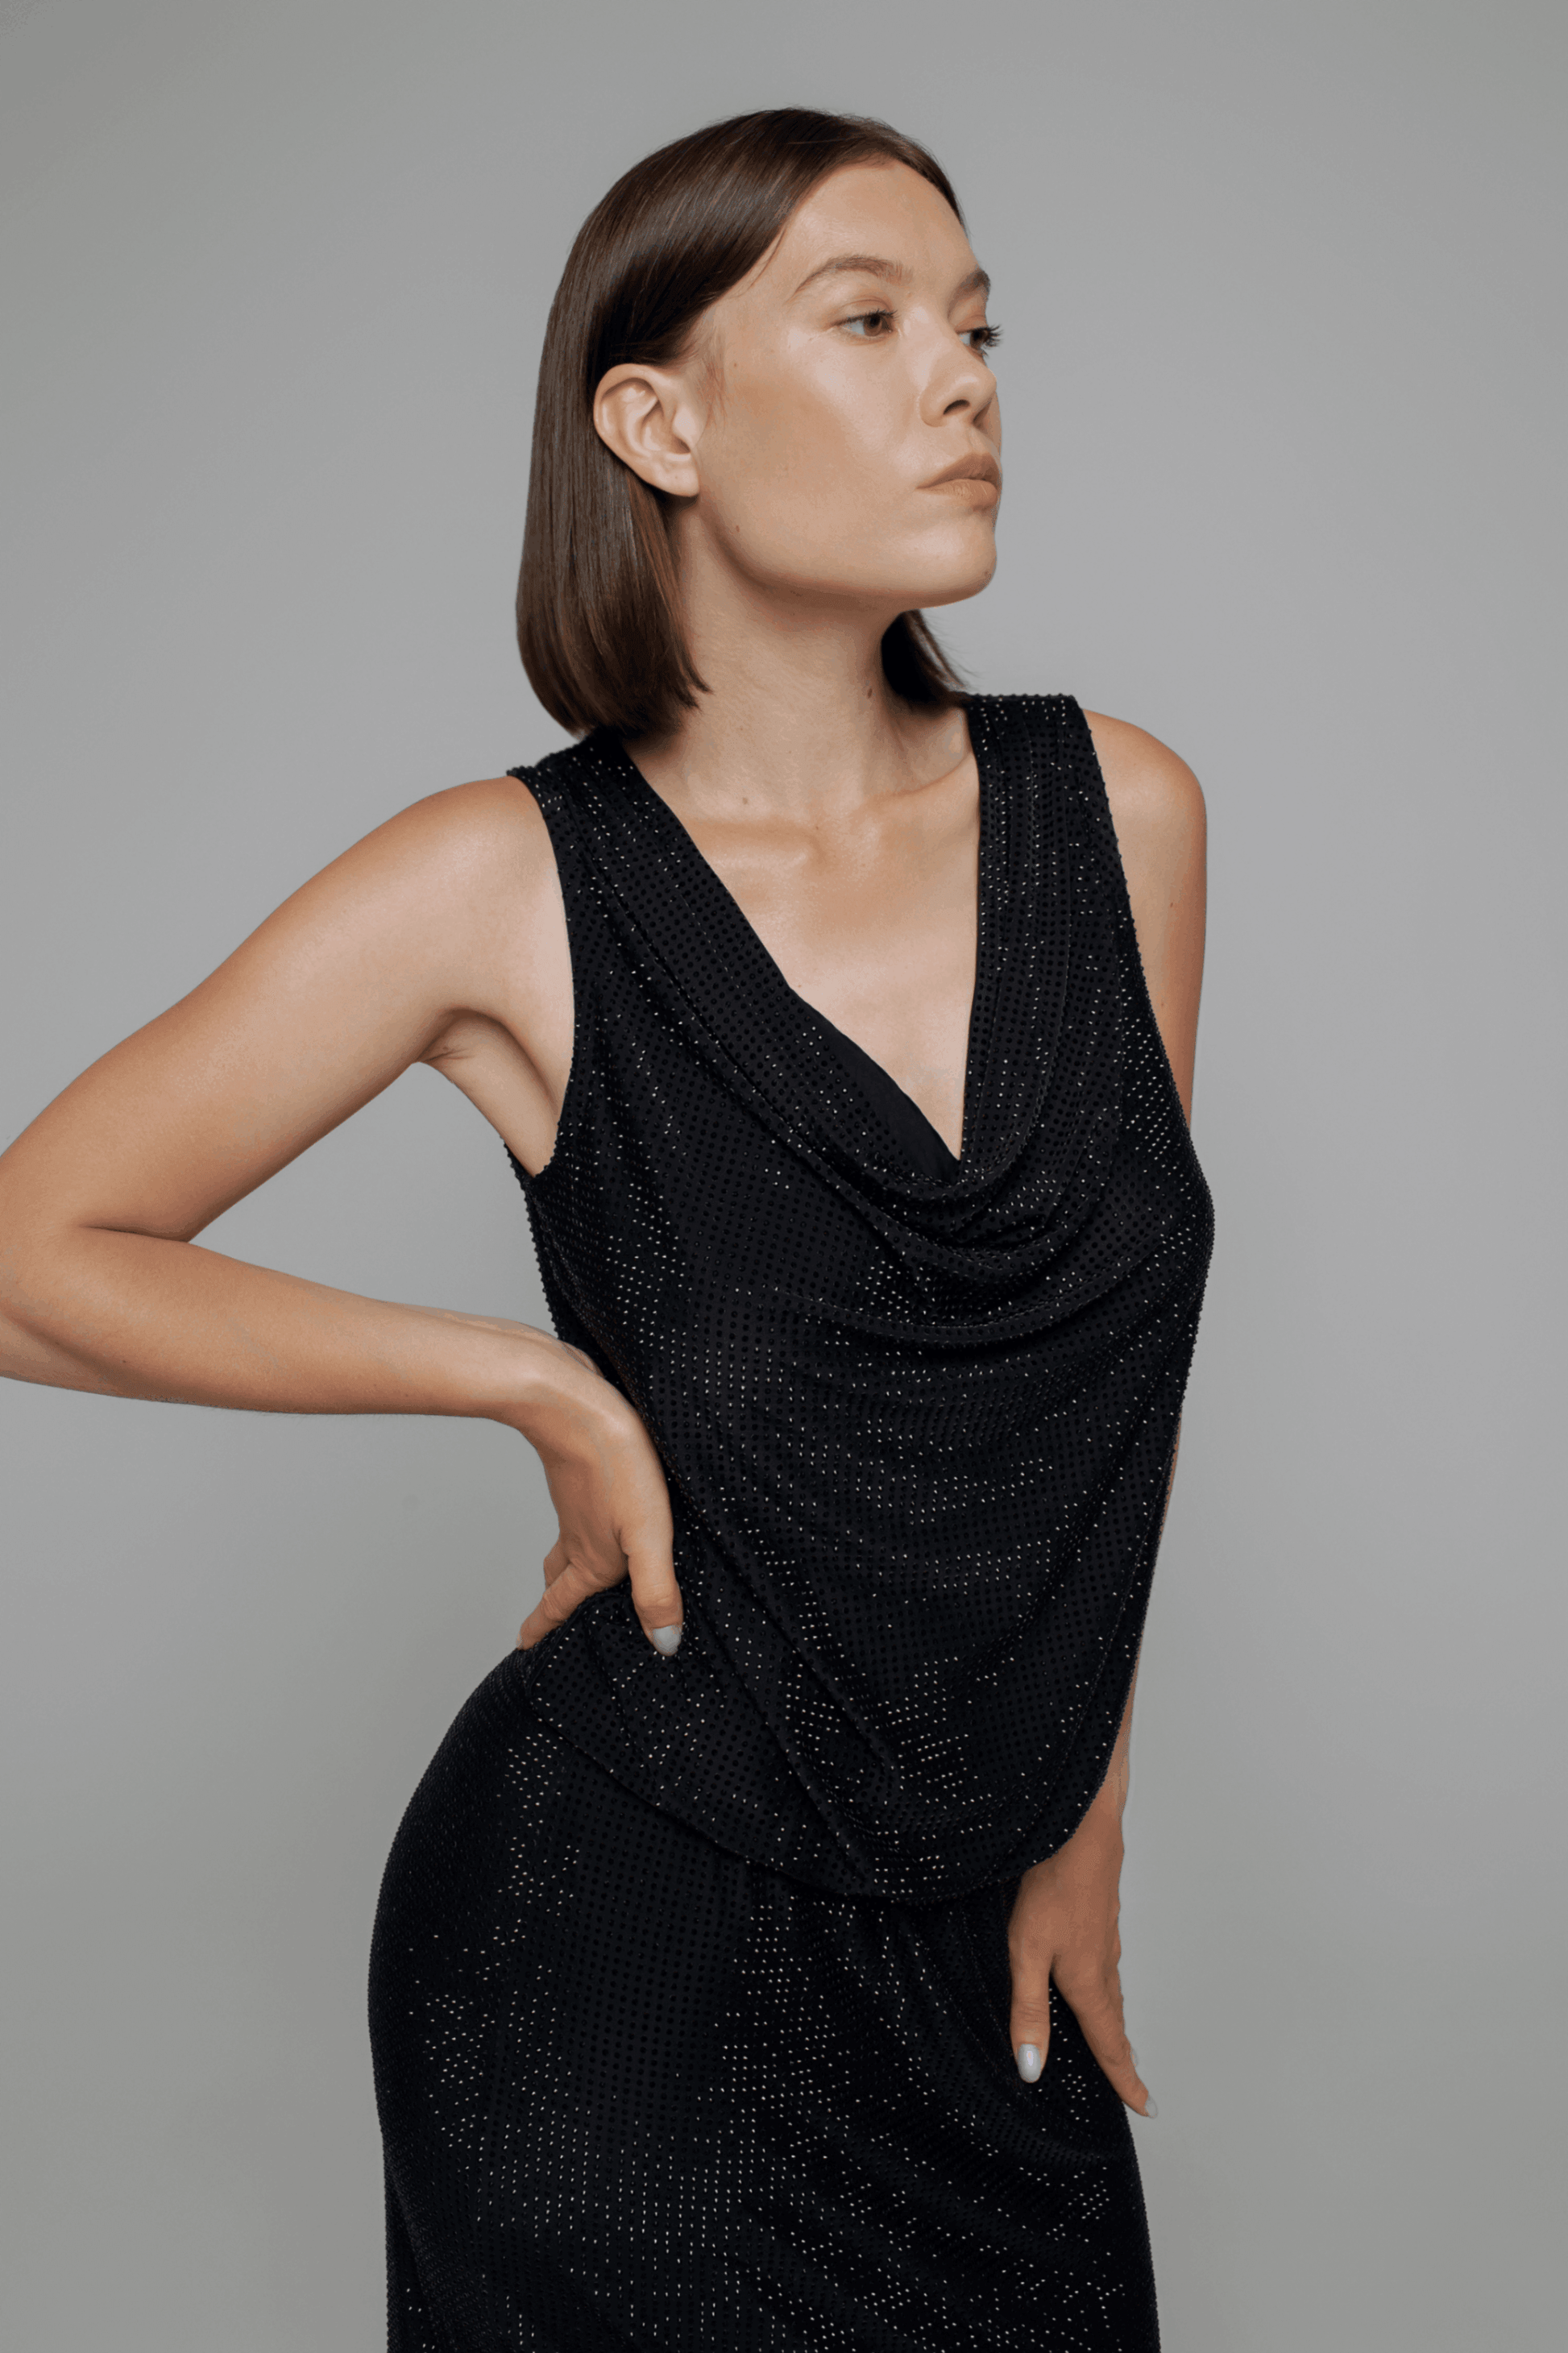 Exquisite detail of Crystal Cowlneck Sleeveless Top showcasing the fine craftsmanship and elegant design characteristic of Axinia Collection 's luxury collection.